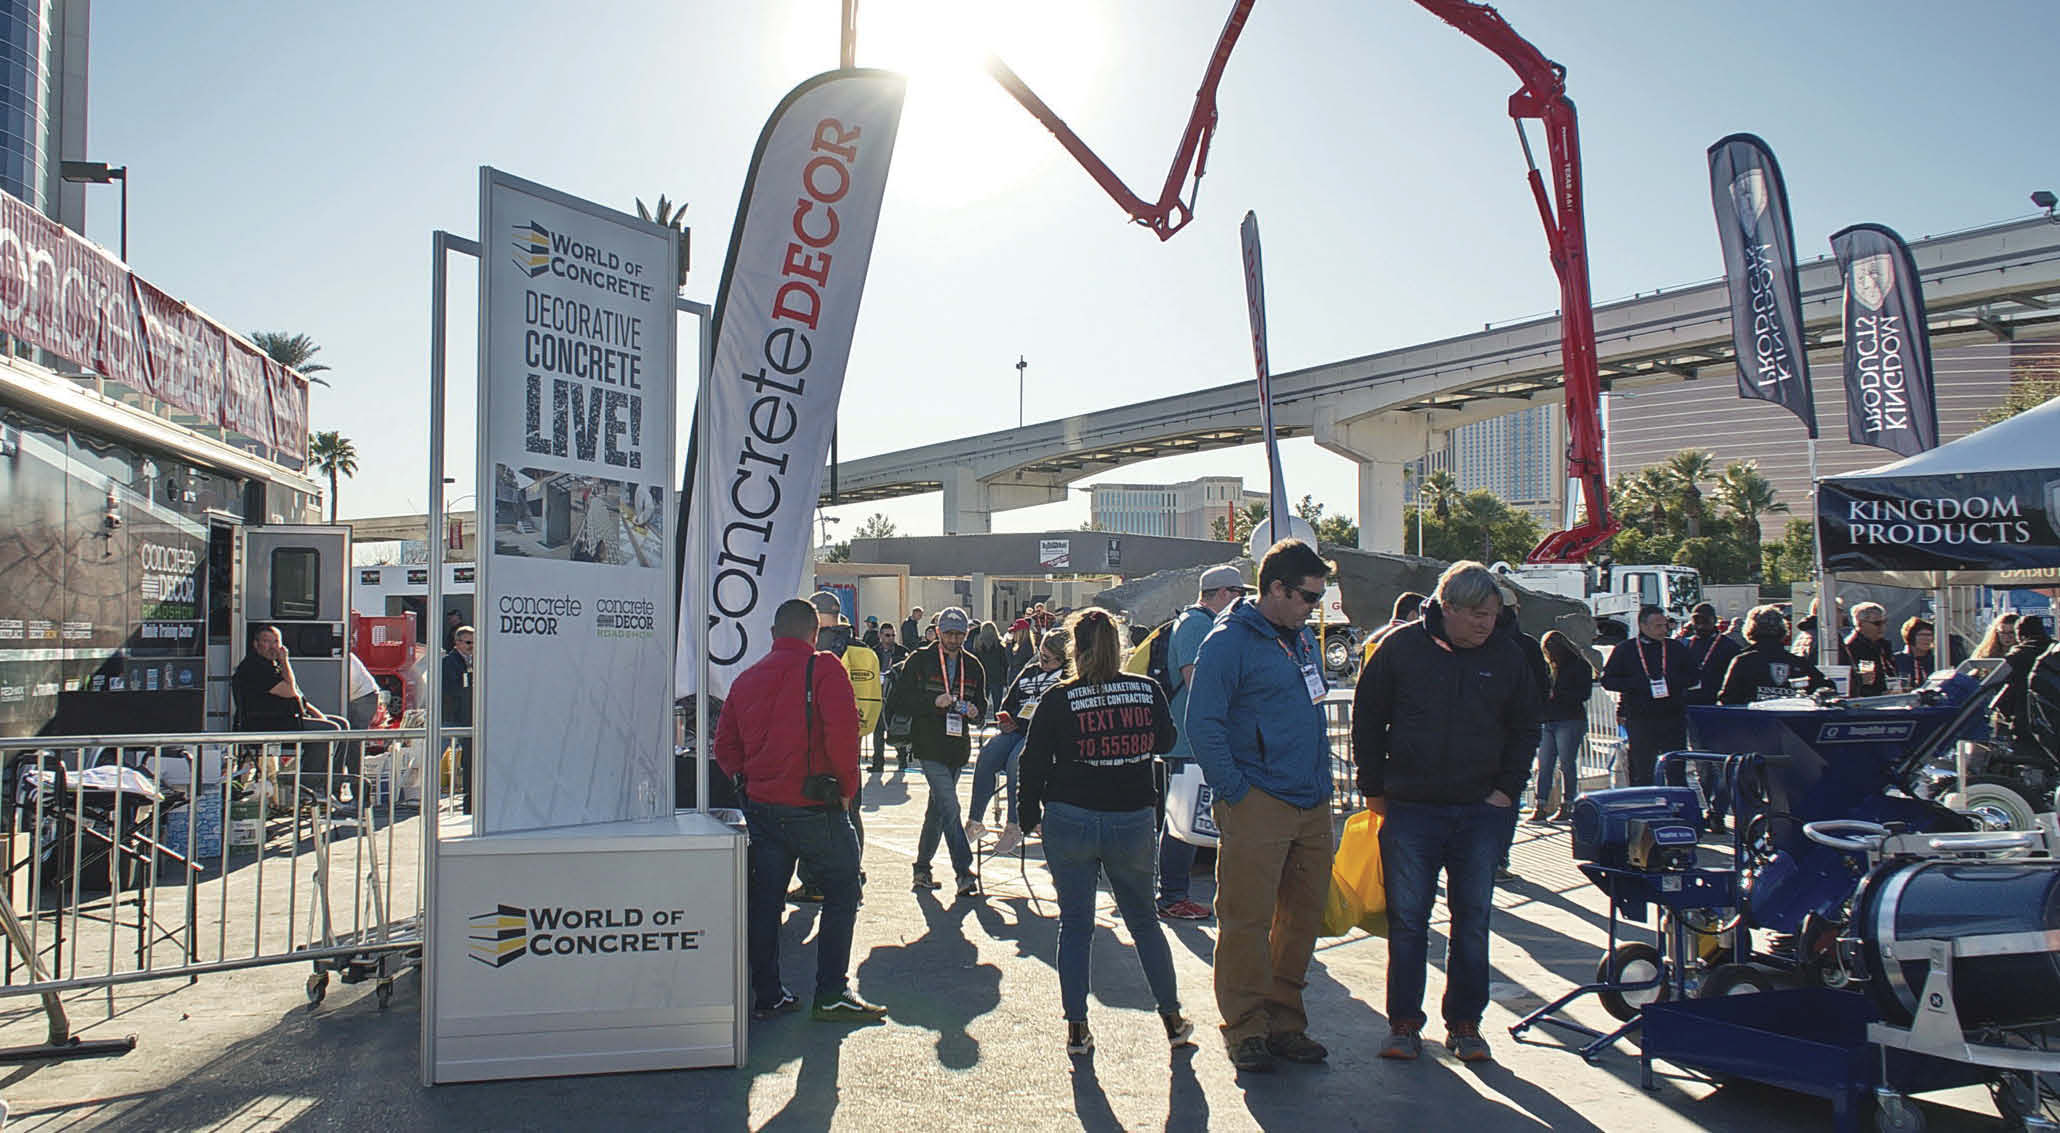 Attendees gather to see decorative concrete at the World of Concrete display Decorative Concrete LIVE! put on by Concrete Decor magazine.